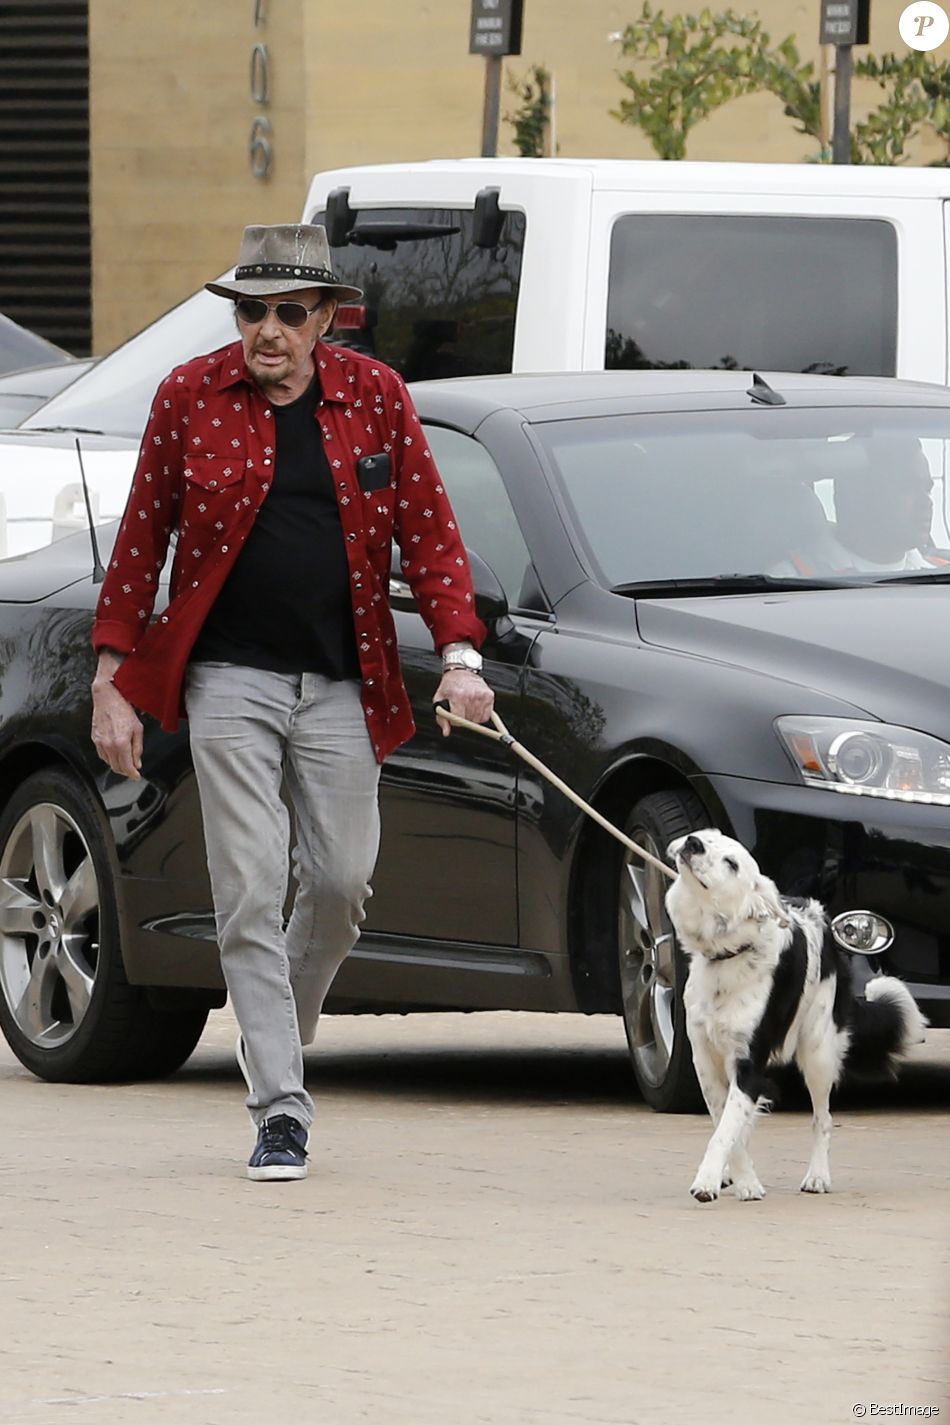 http://static1.purepeople.com/articles/7/23/72/47/@/3305014-johnny-hallyday-arrive-avec-sa-chienne-c-950x0-1.jpg